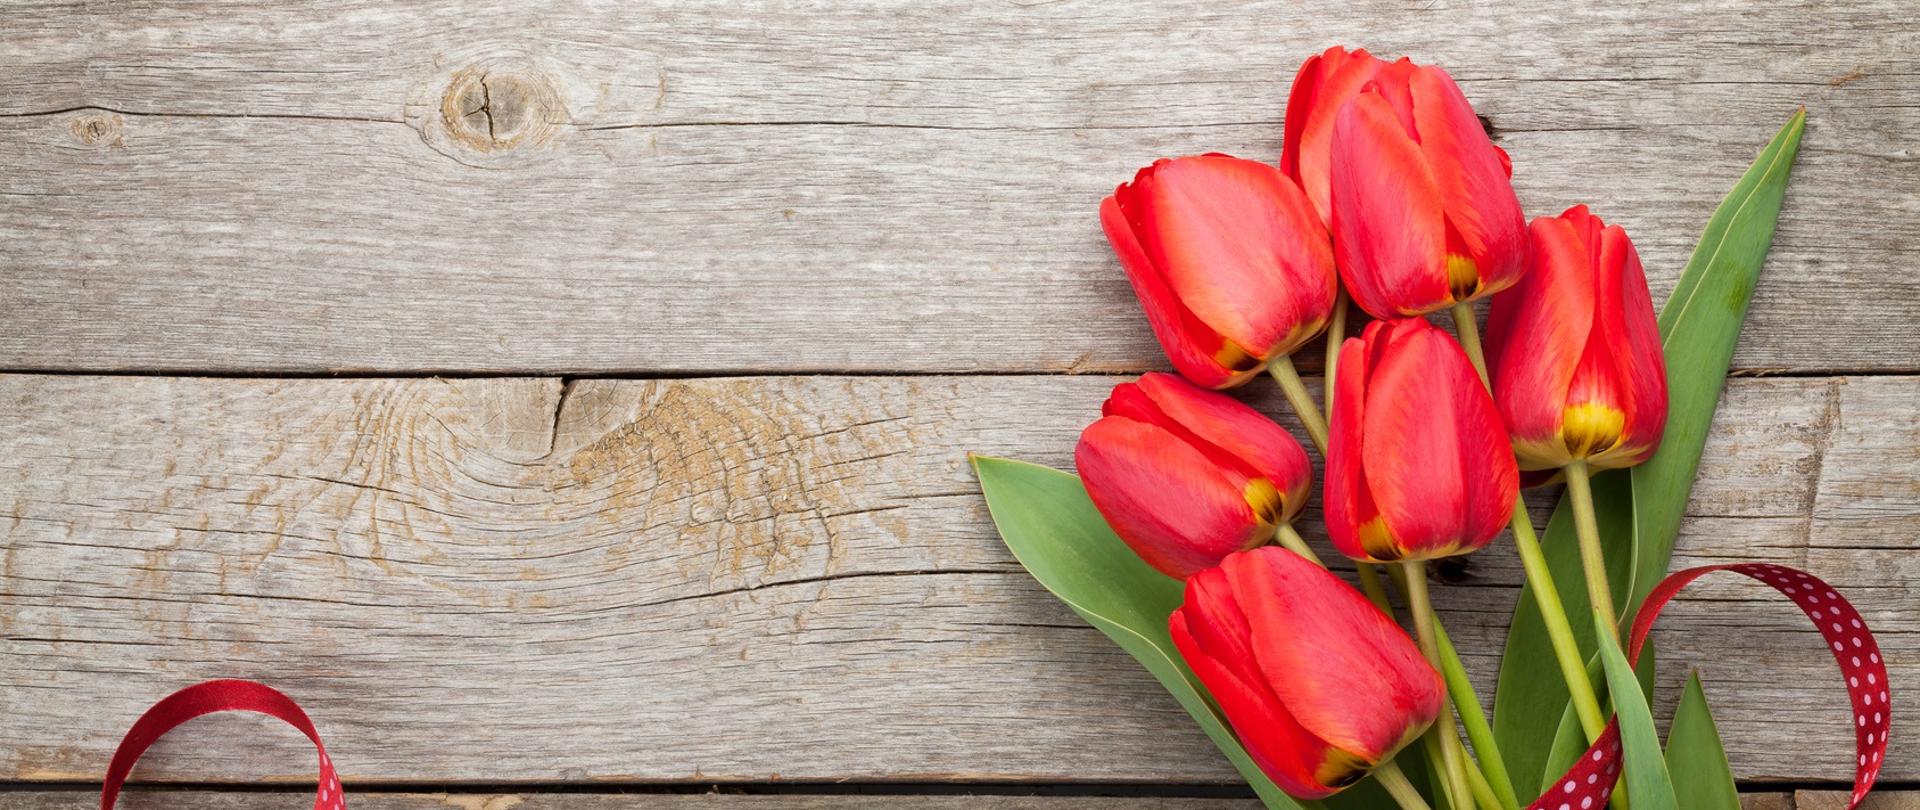 Fresh tulips bouquet over wooden table background